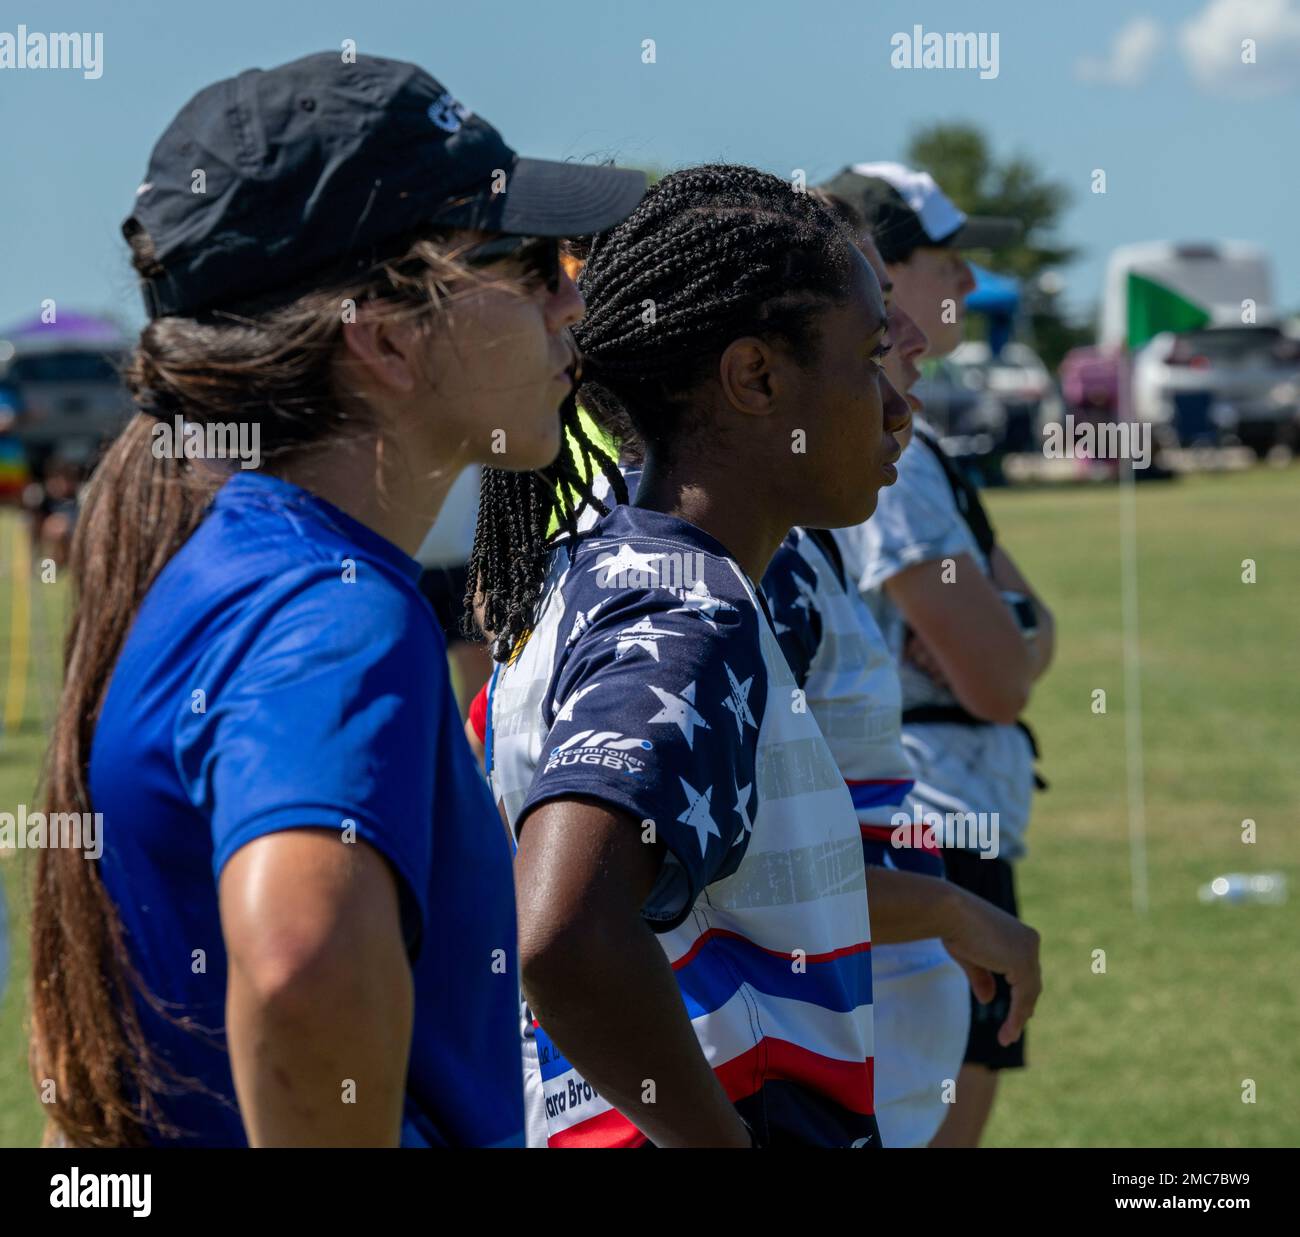 Members of the Department of Air Force Womens Rugby Team watch a game against the Northern Virginia Rugby Team after competing in the Annual Armed Forces Womens Rugby Championship in Wilmington, North